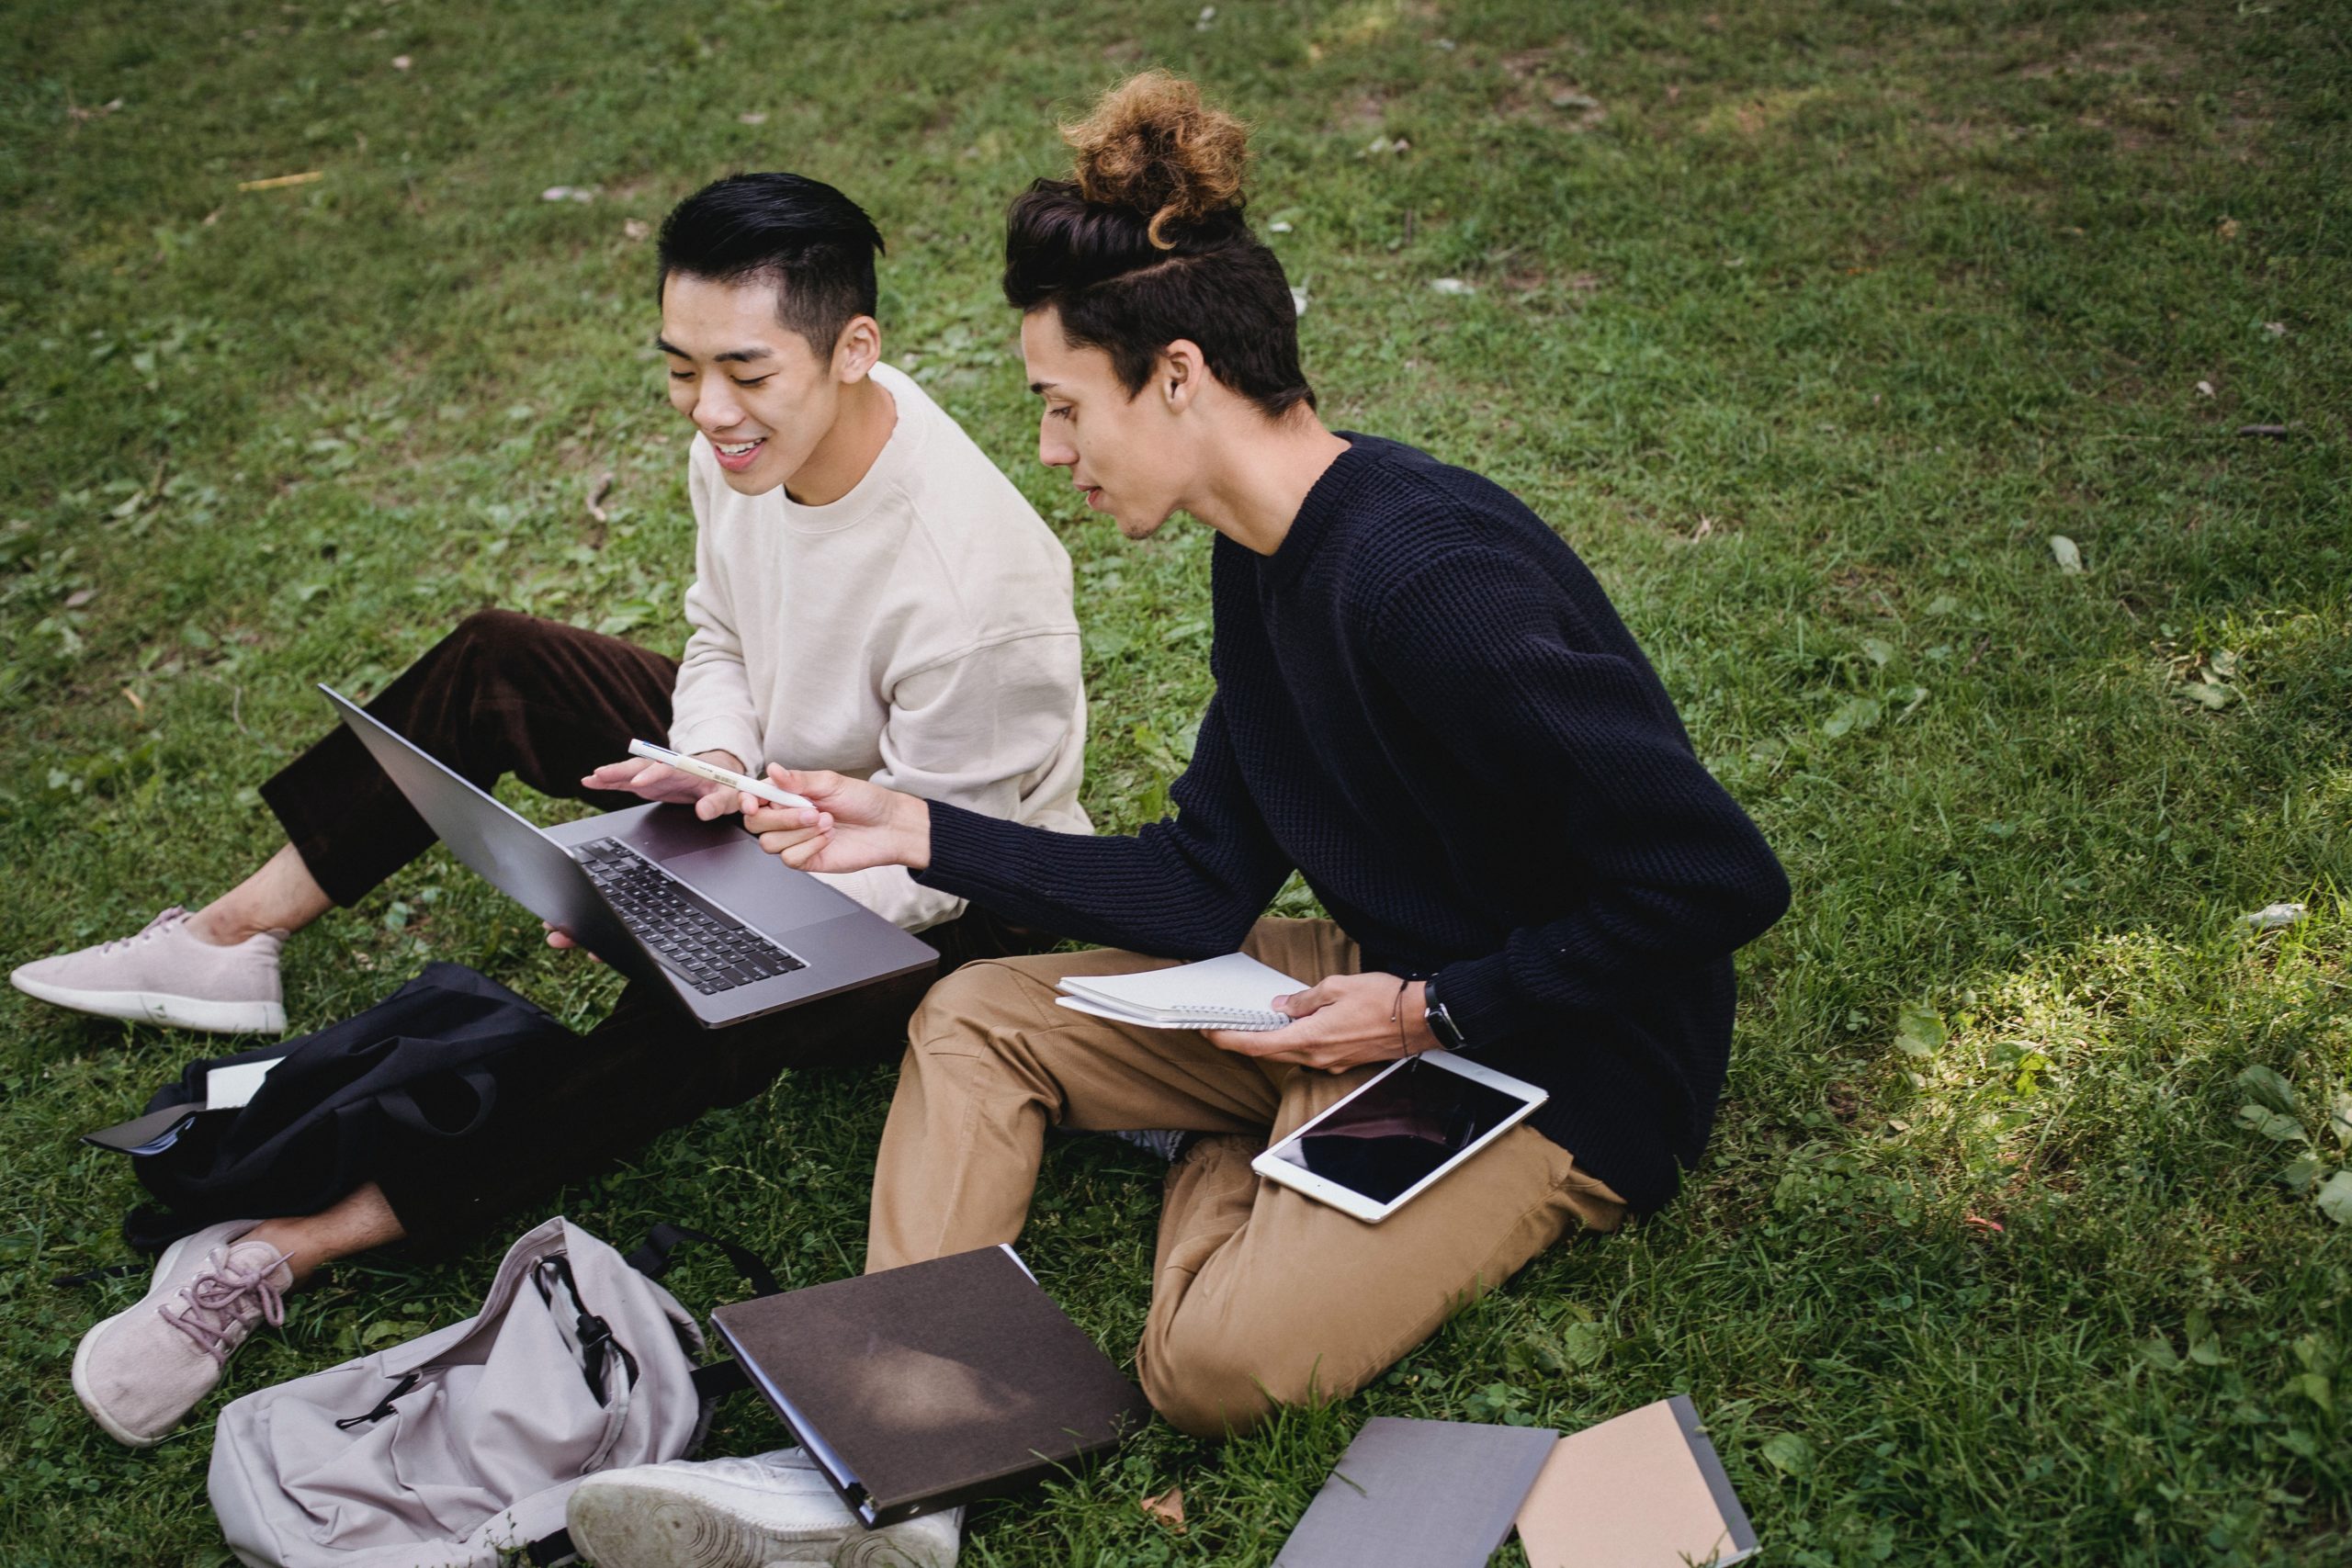 Two students sitting outside on the grass with their books and laptops open.